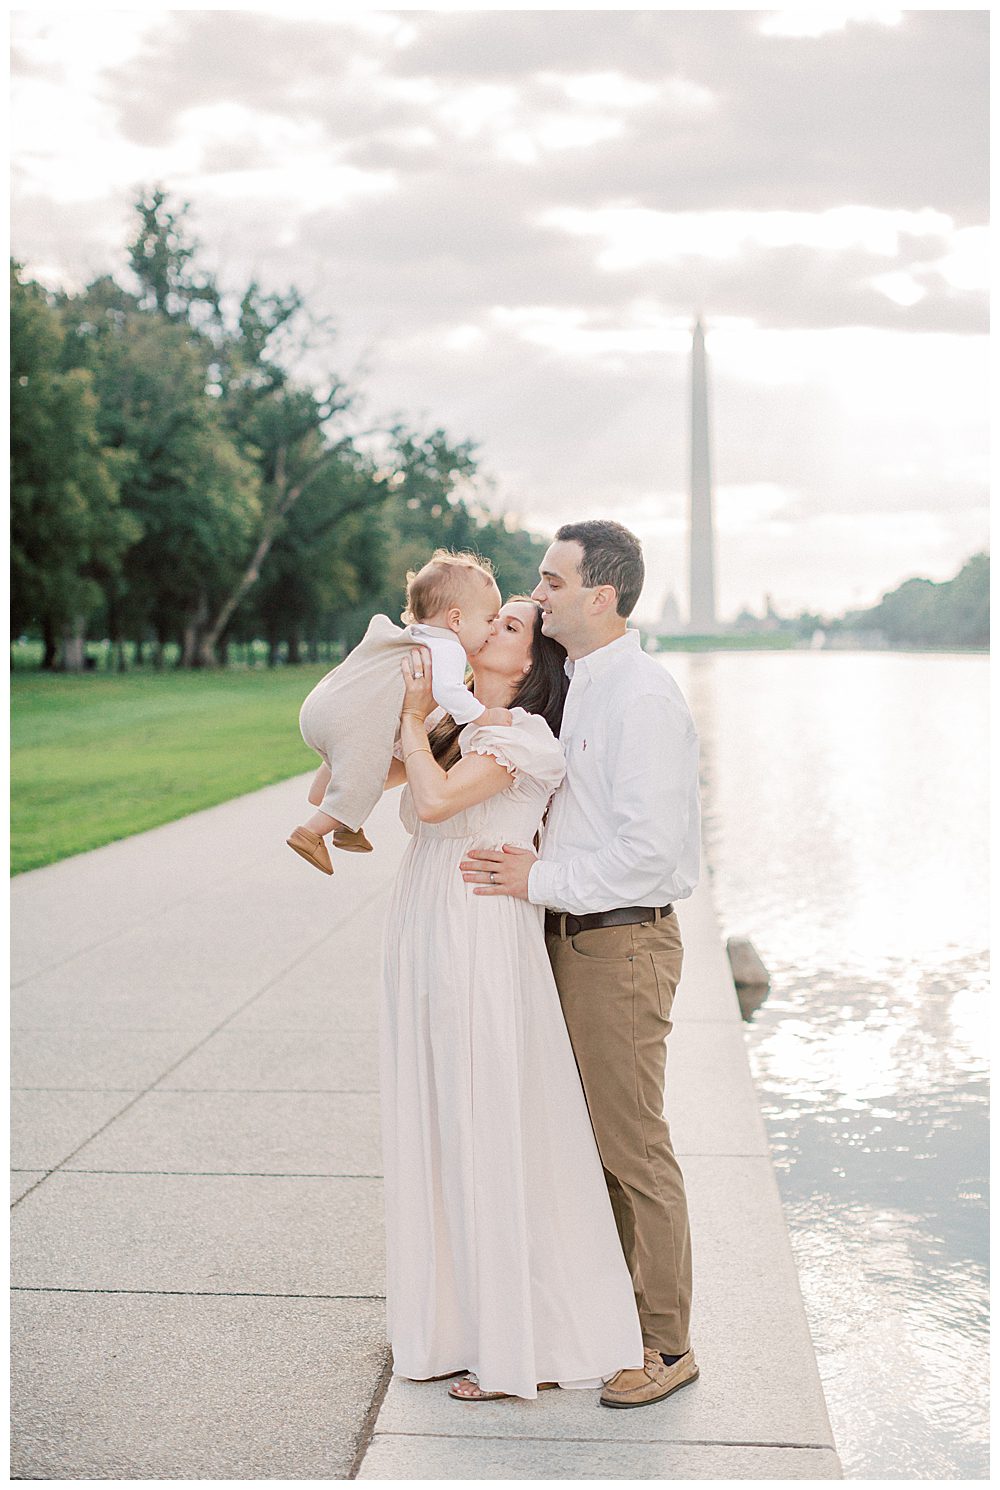 Mother holds up and kisses toddler's cheeks while standing with husband by DC Reflecting Pool.